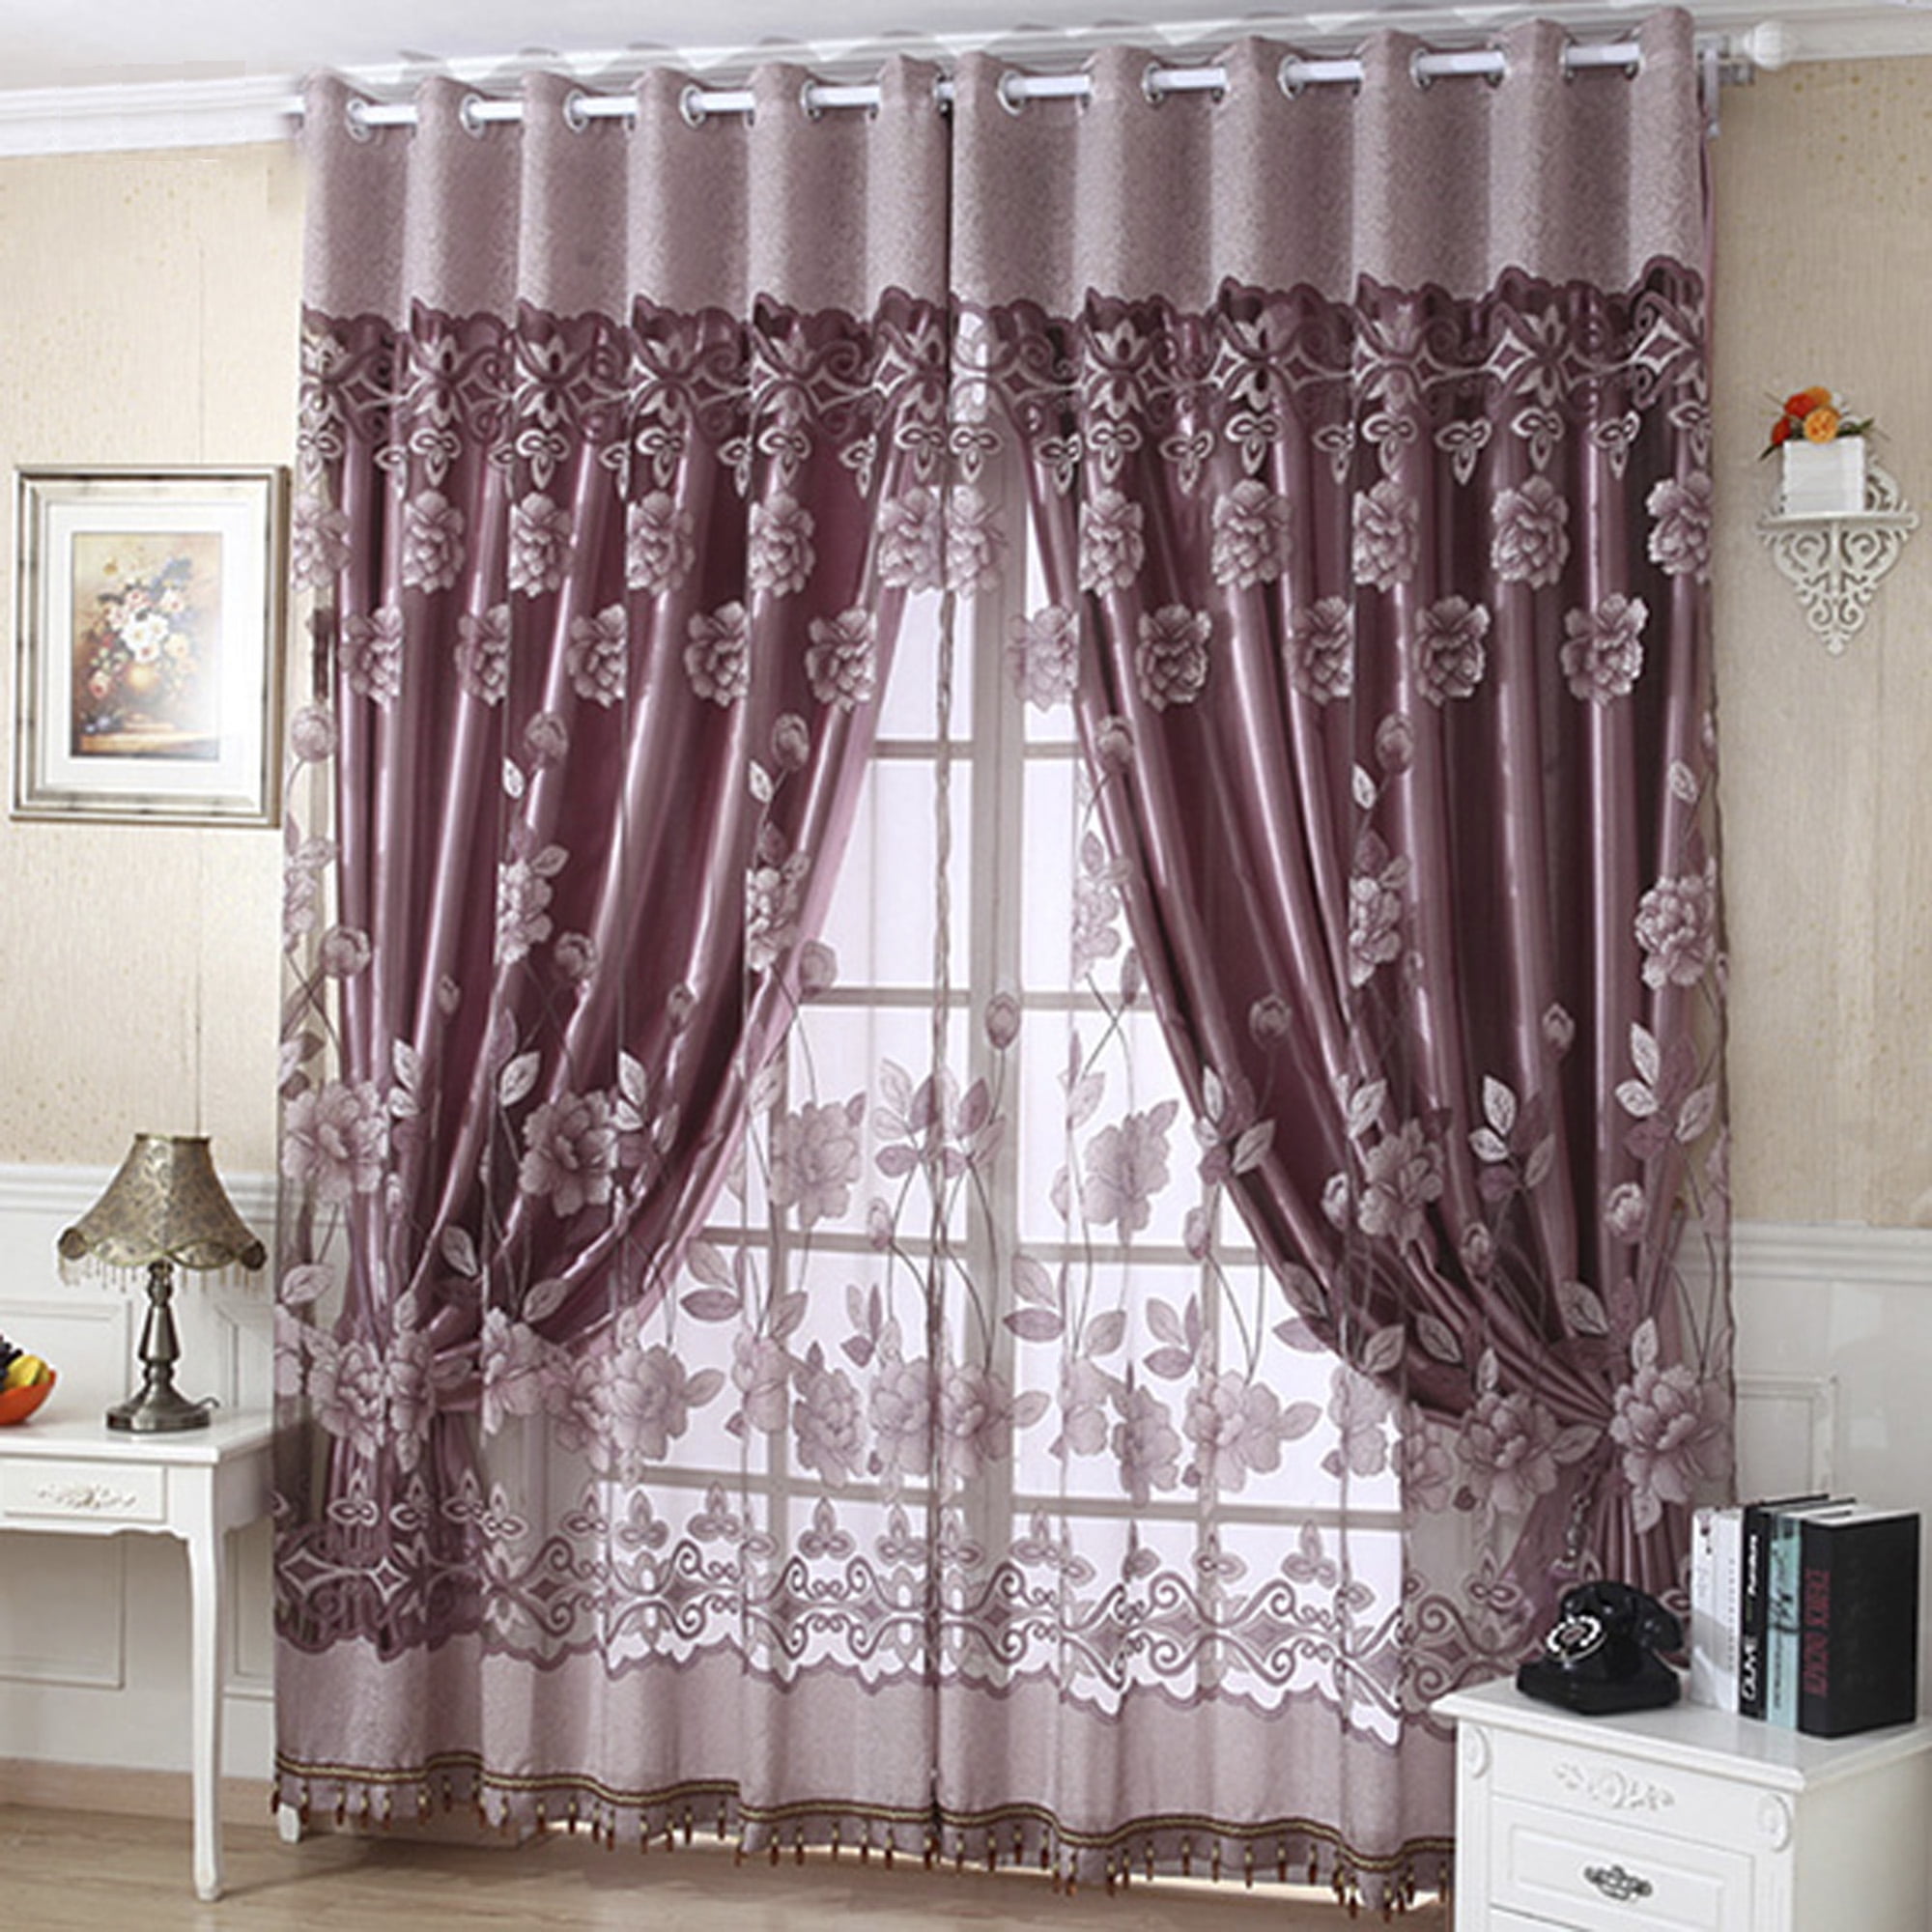 Embroidery Flower Tulle Voile Ds, Elegant Sheer Curtains For Living Room